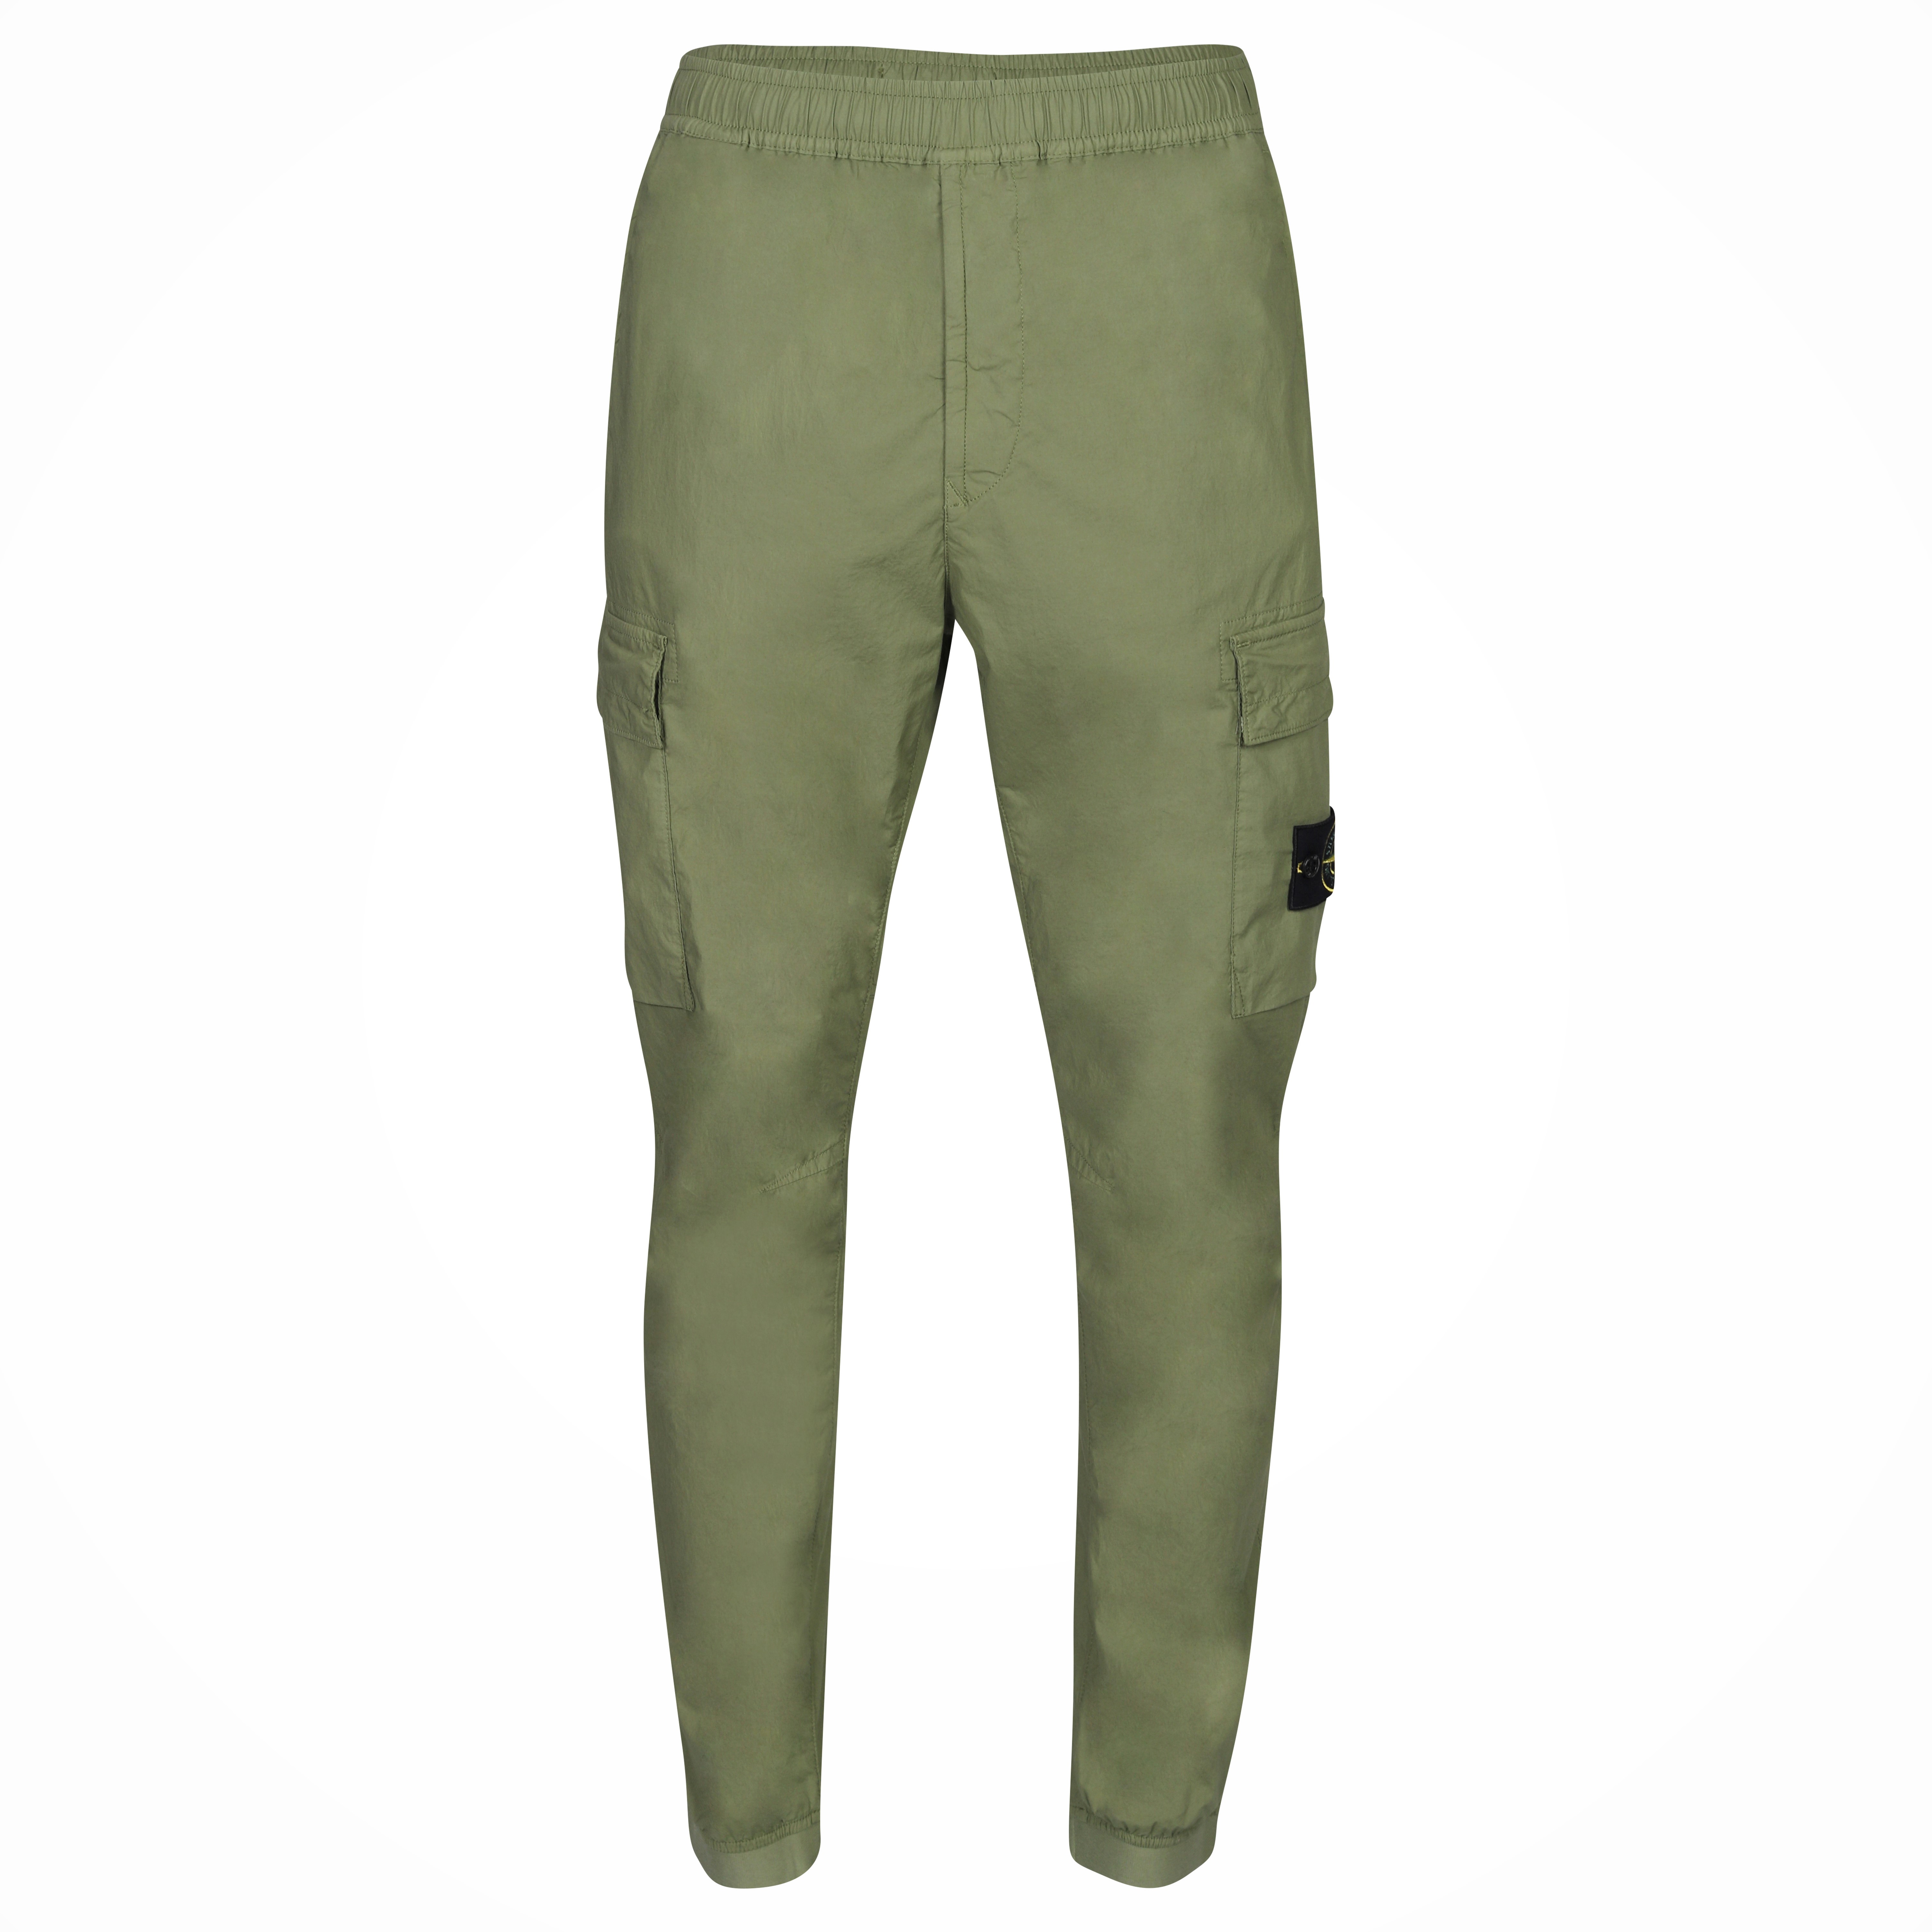 Stone Island Light Cargo Pant in Olive 33